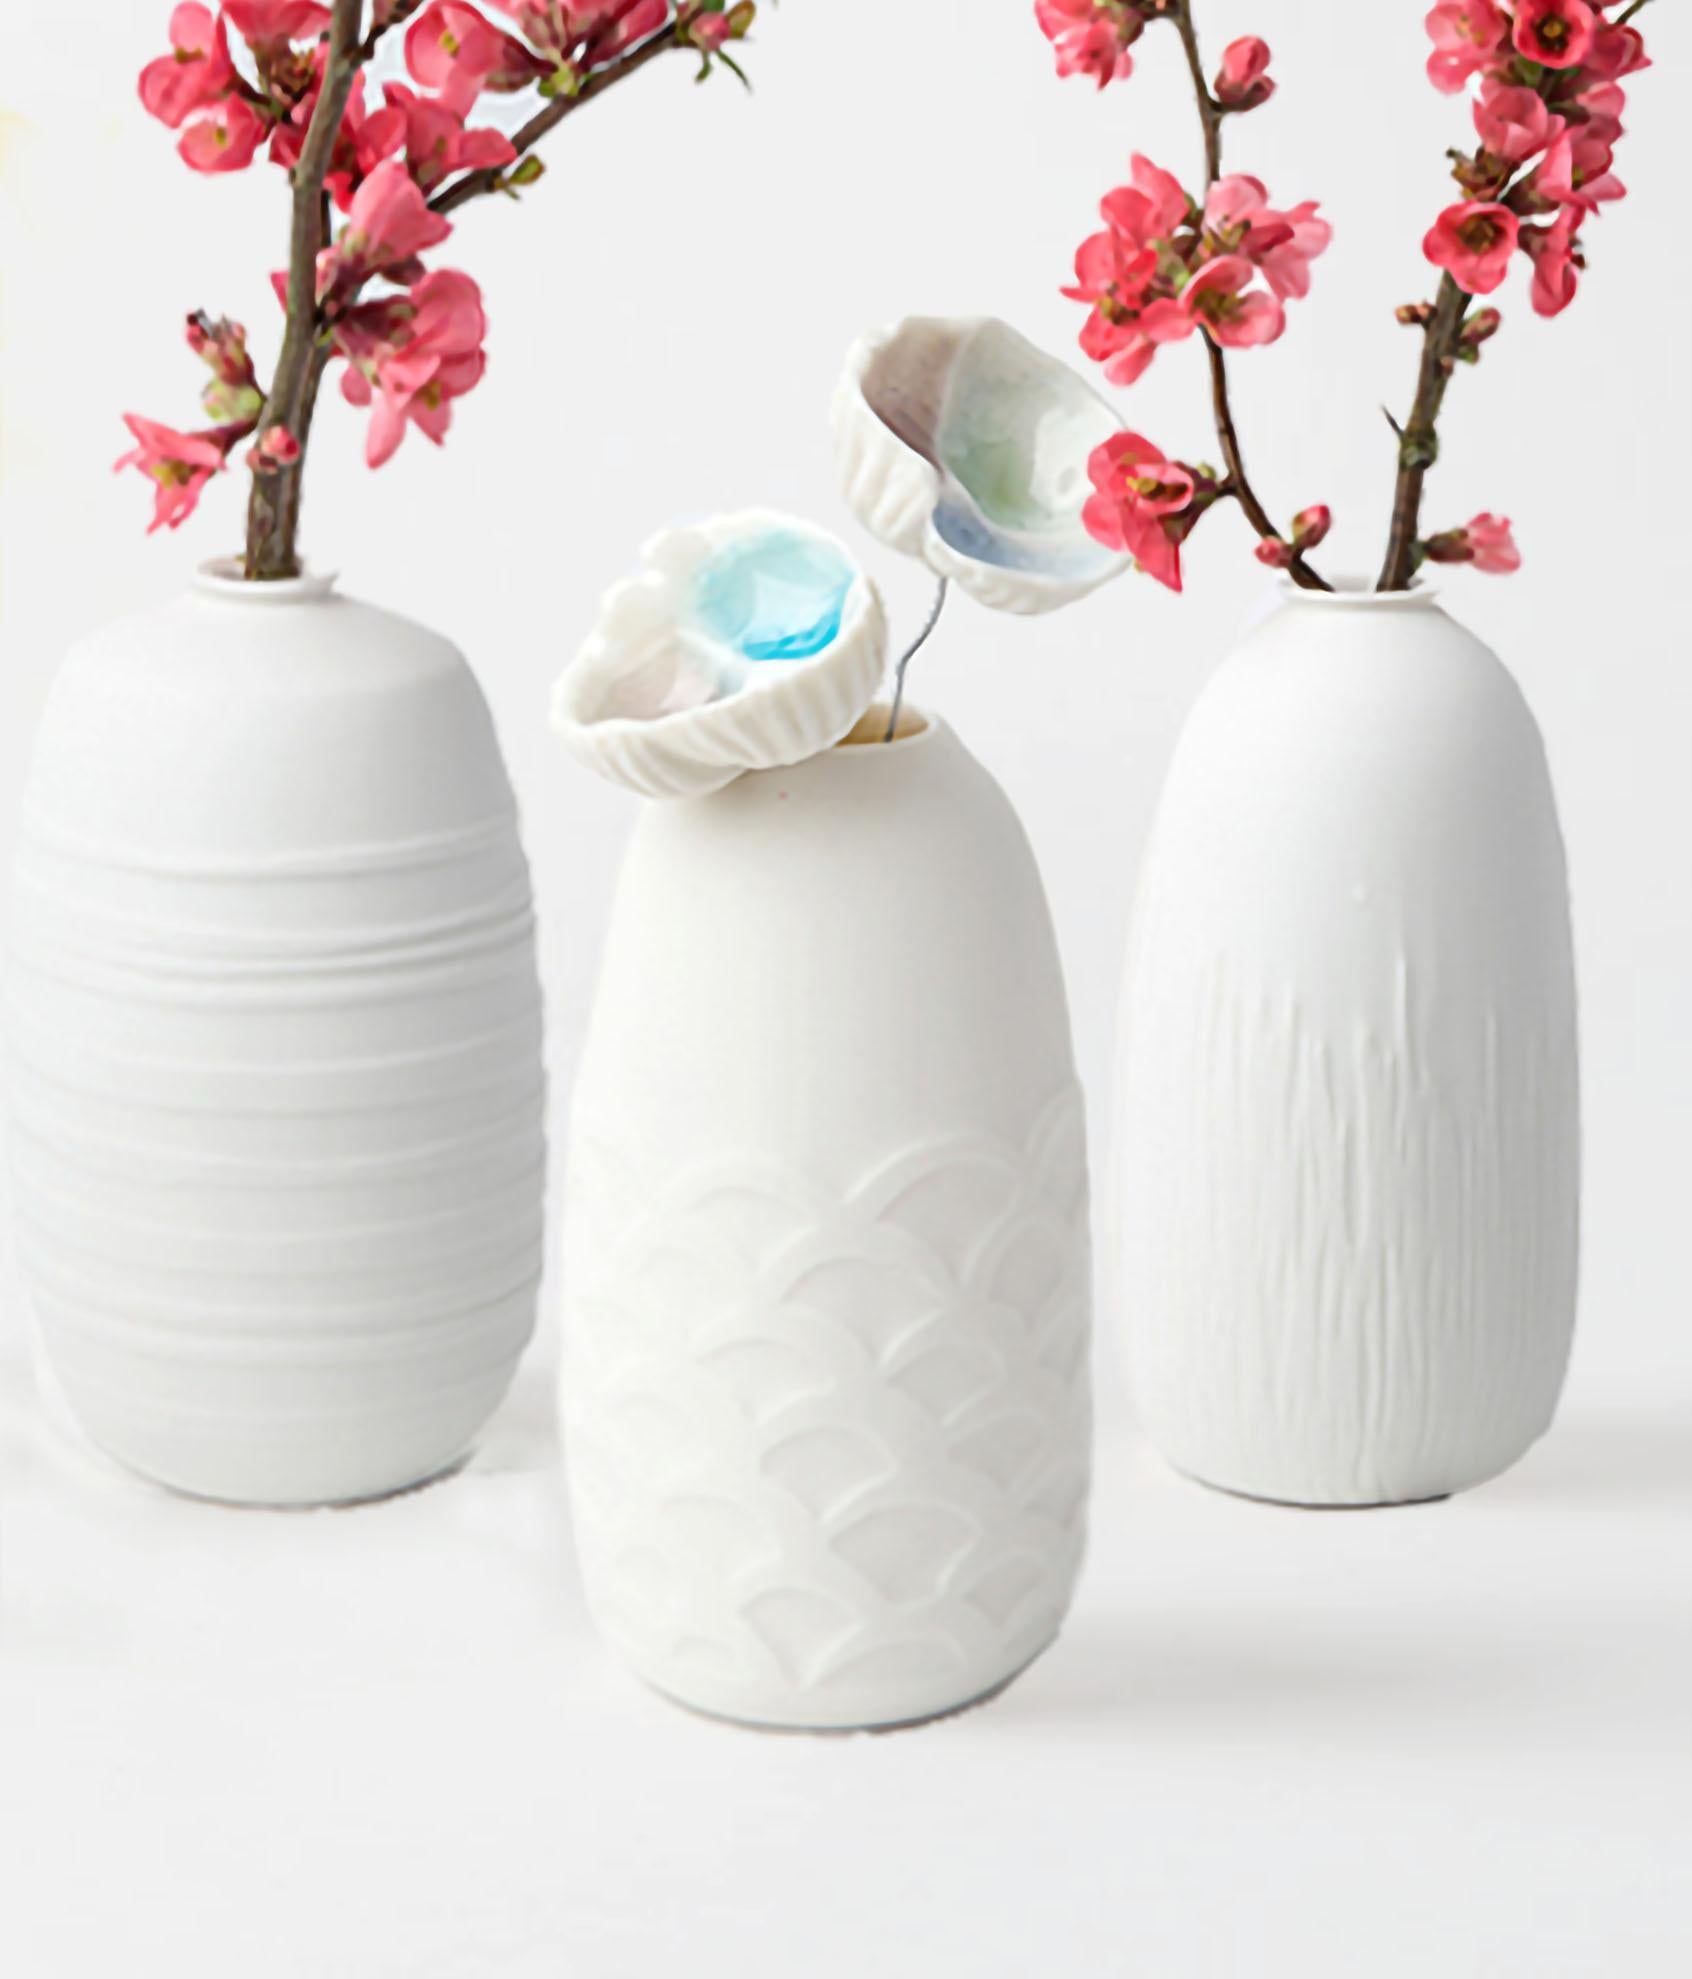 Hand-Crafted Vase Soliflore Horizon - Set For Sale